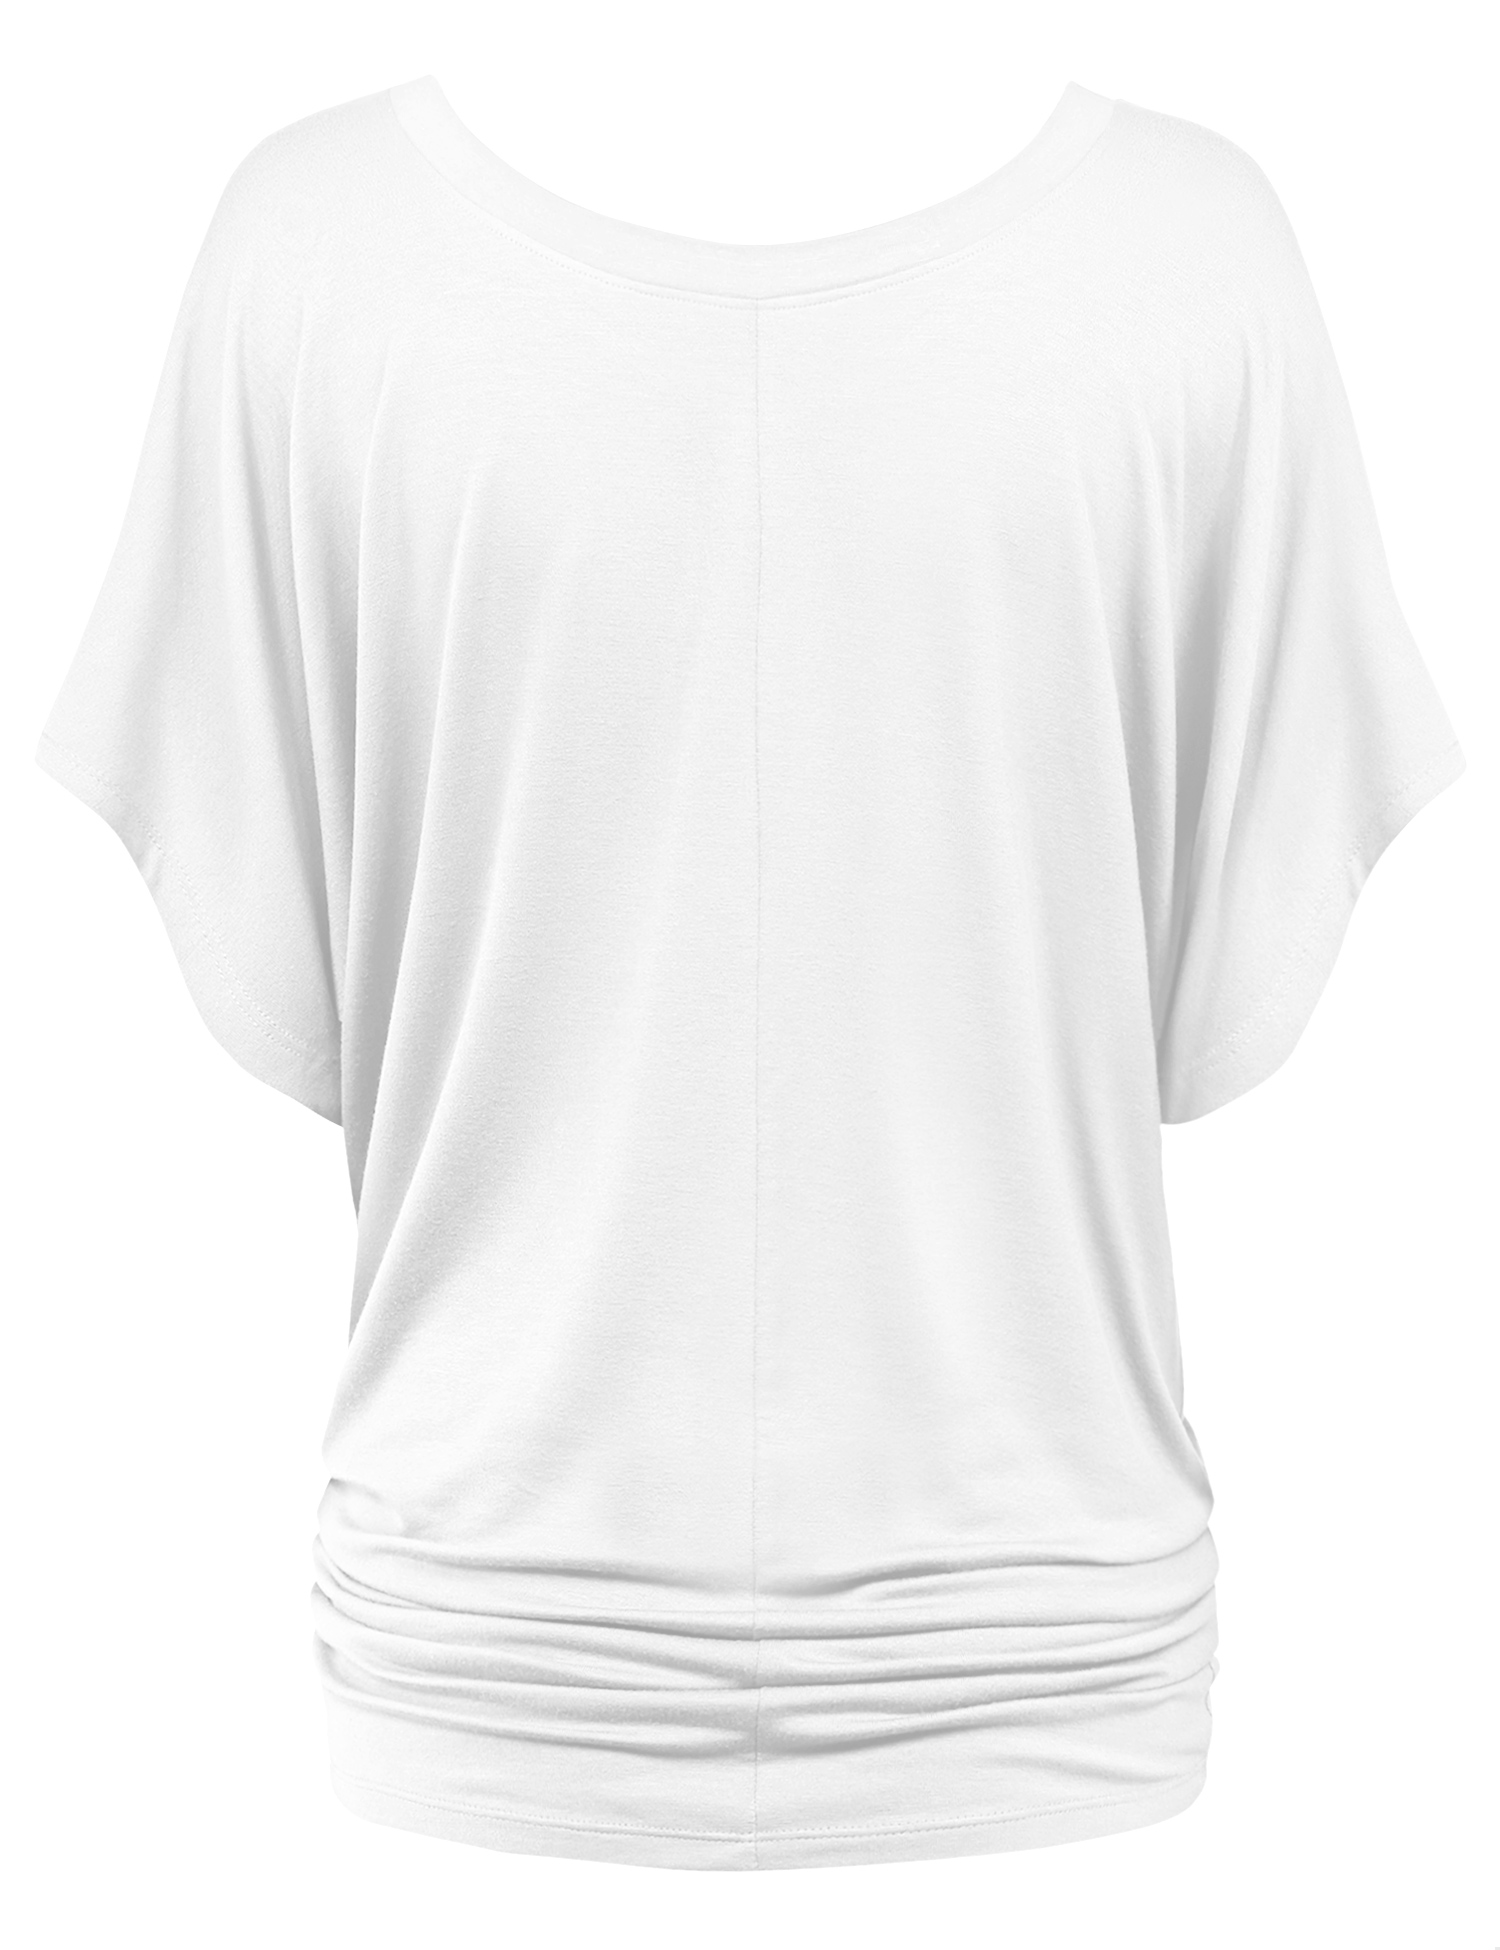 Made by Johnny Women's Boat Neck Short Sleeve Dolman Drape Top S WHITE - image 2 of 6